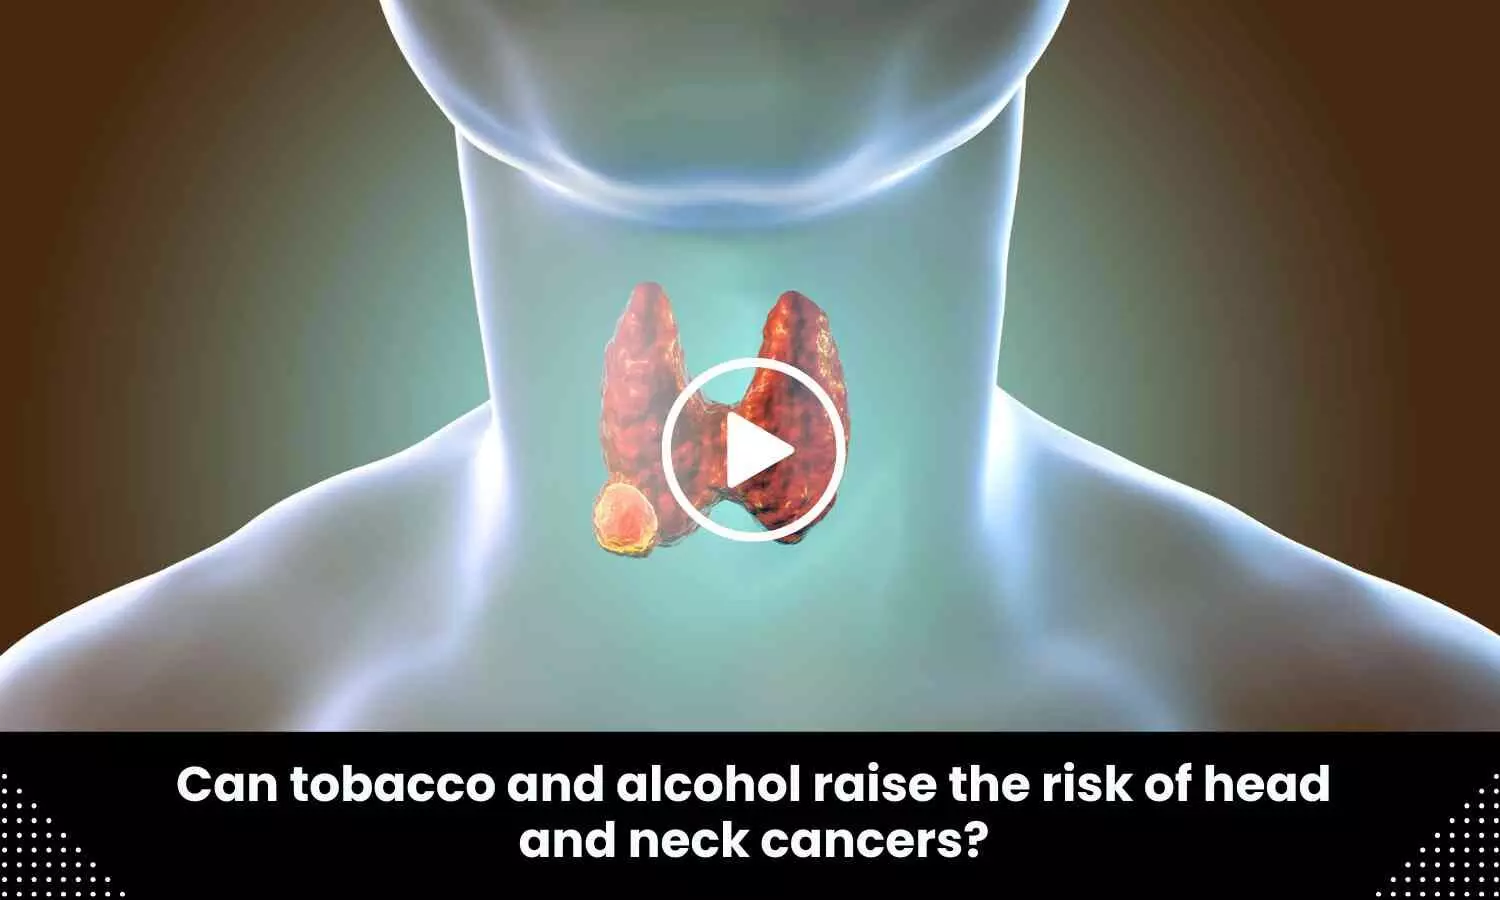 Can tobacco and alcohol raise the risk of head and neck cancers? Study finds out